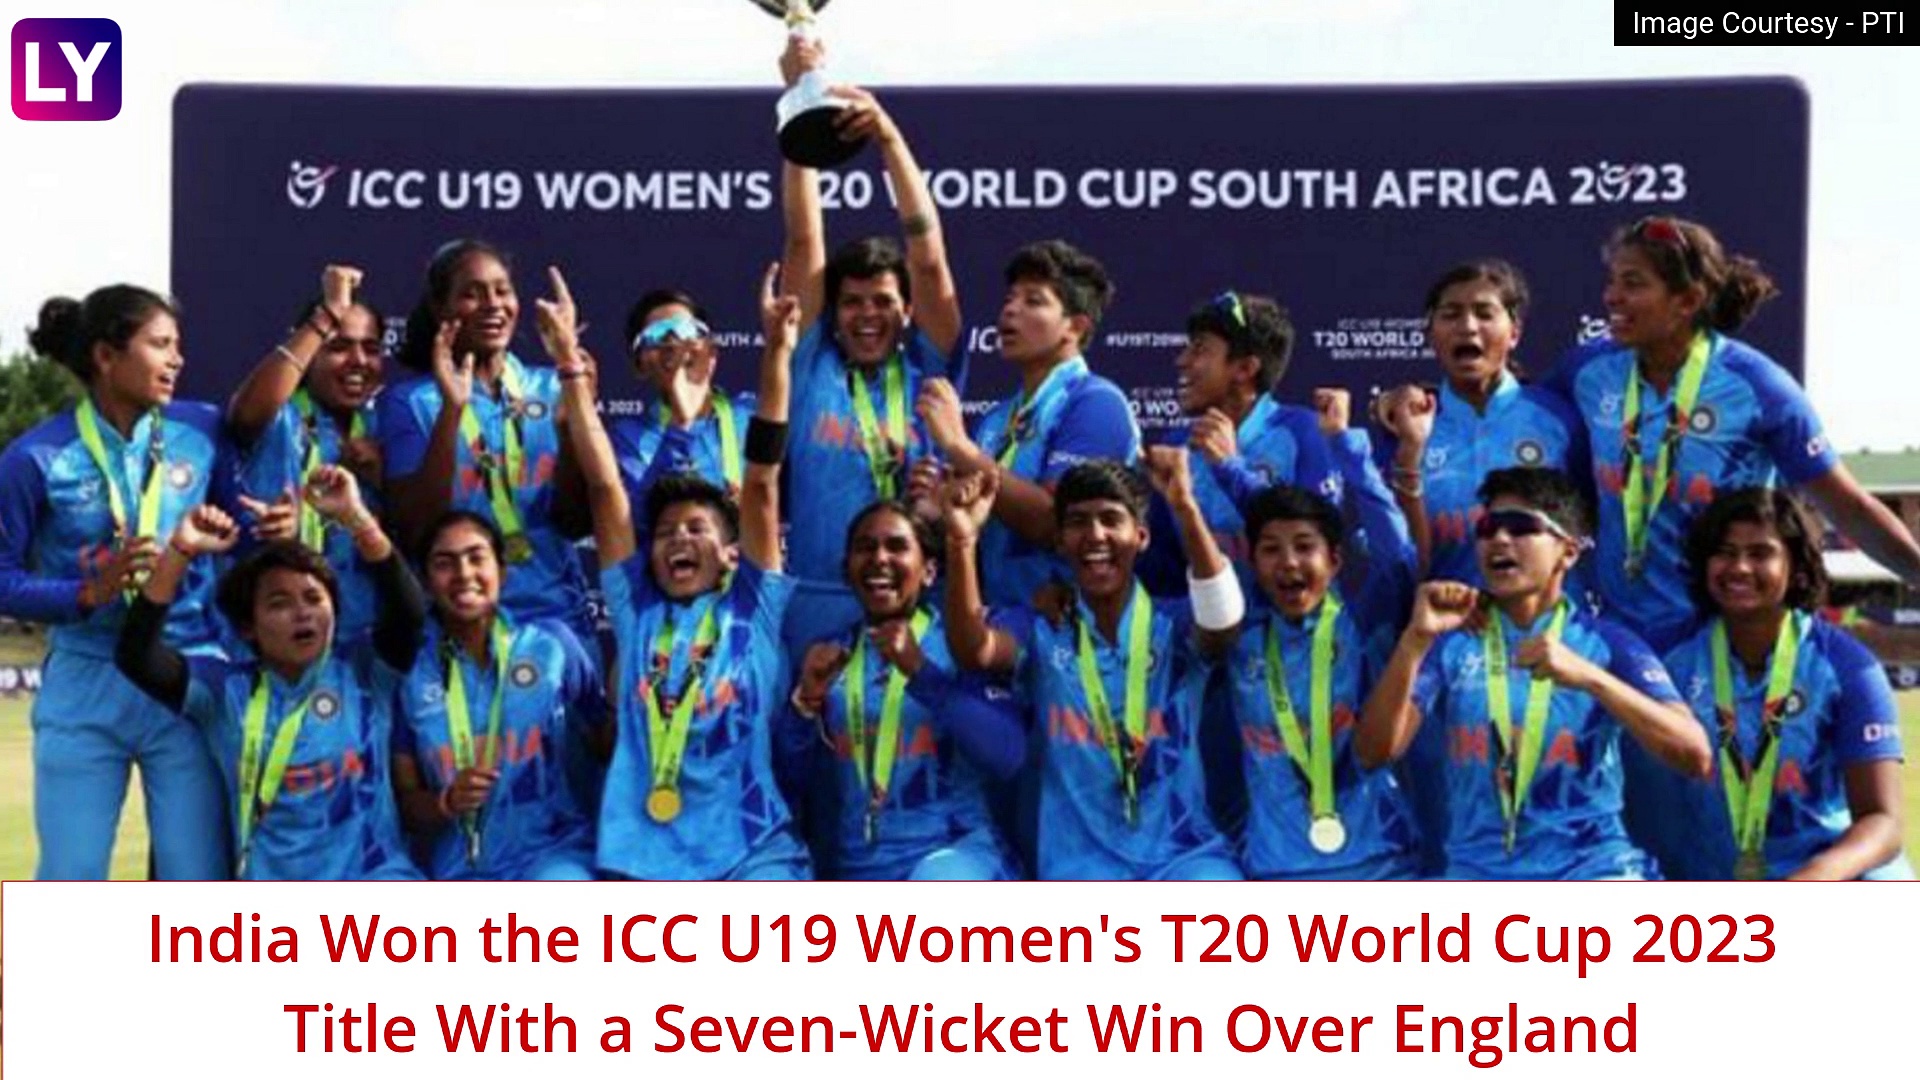 India Win ICC U19 Women’s T20 World Cup 2023 Title, Beat England by Seven Wickets